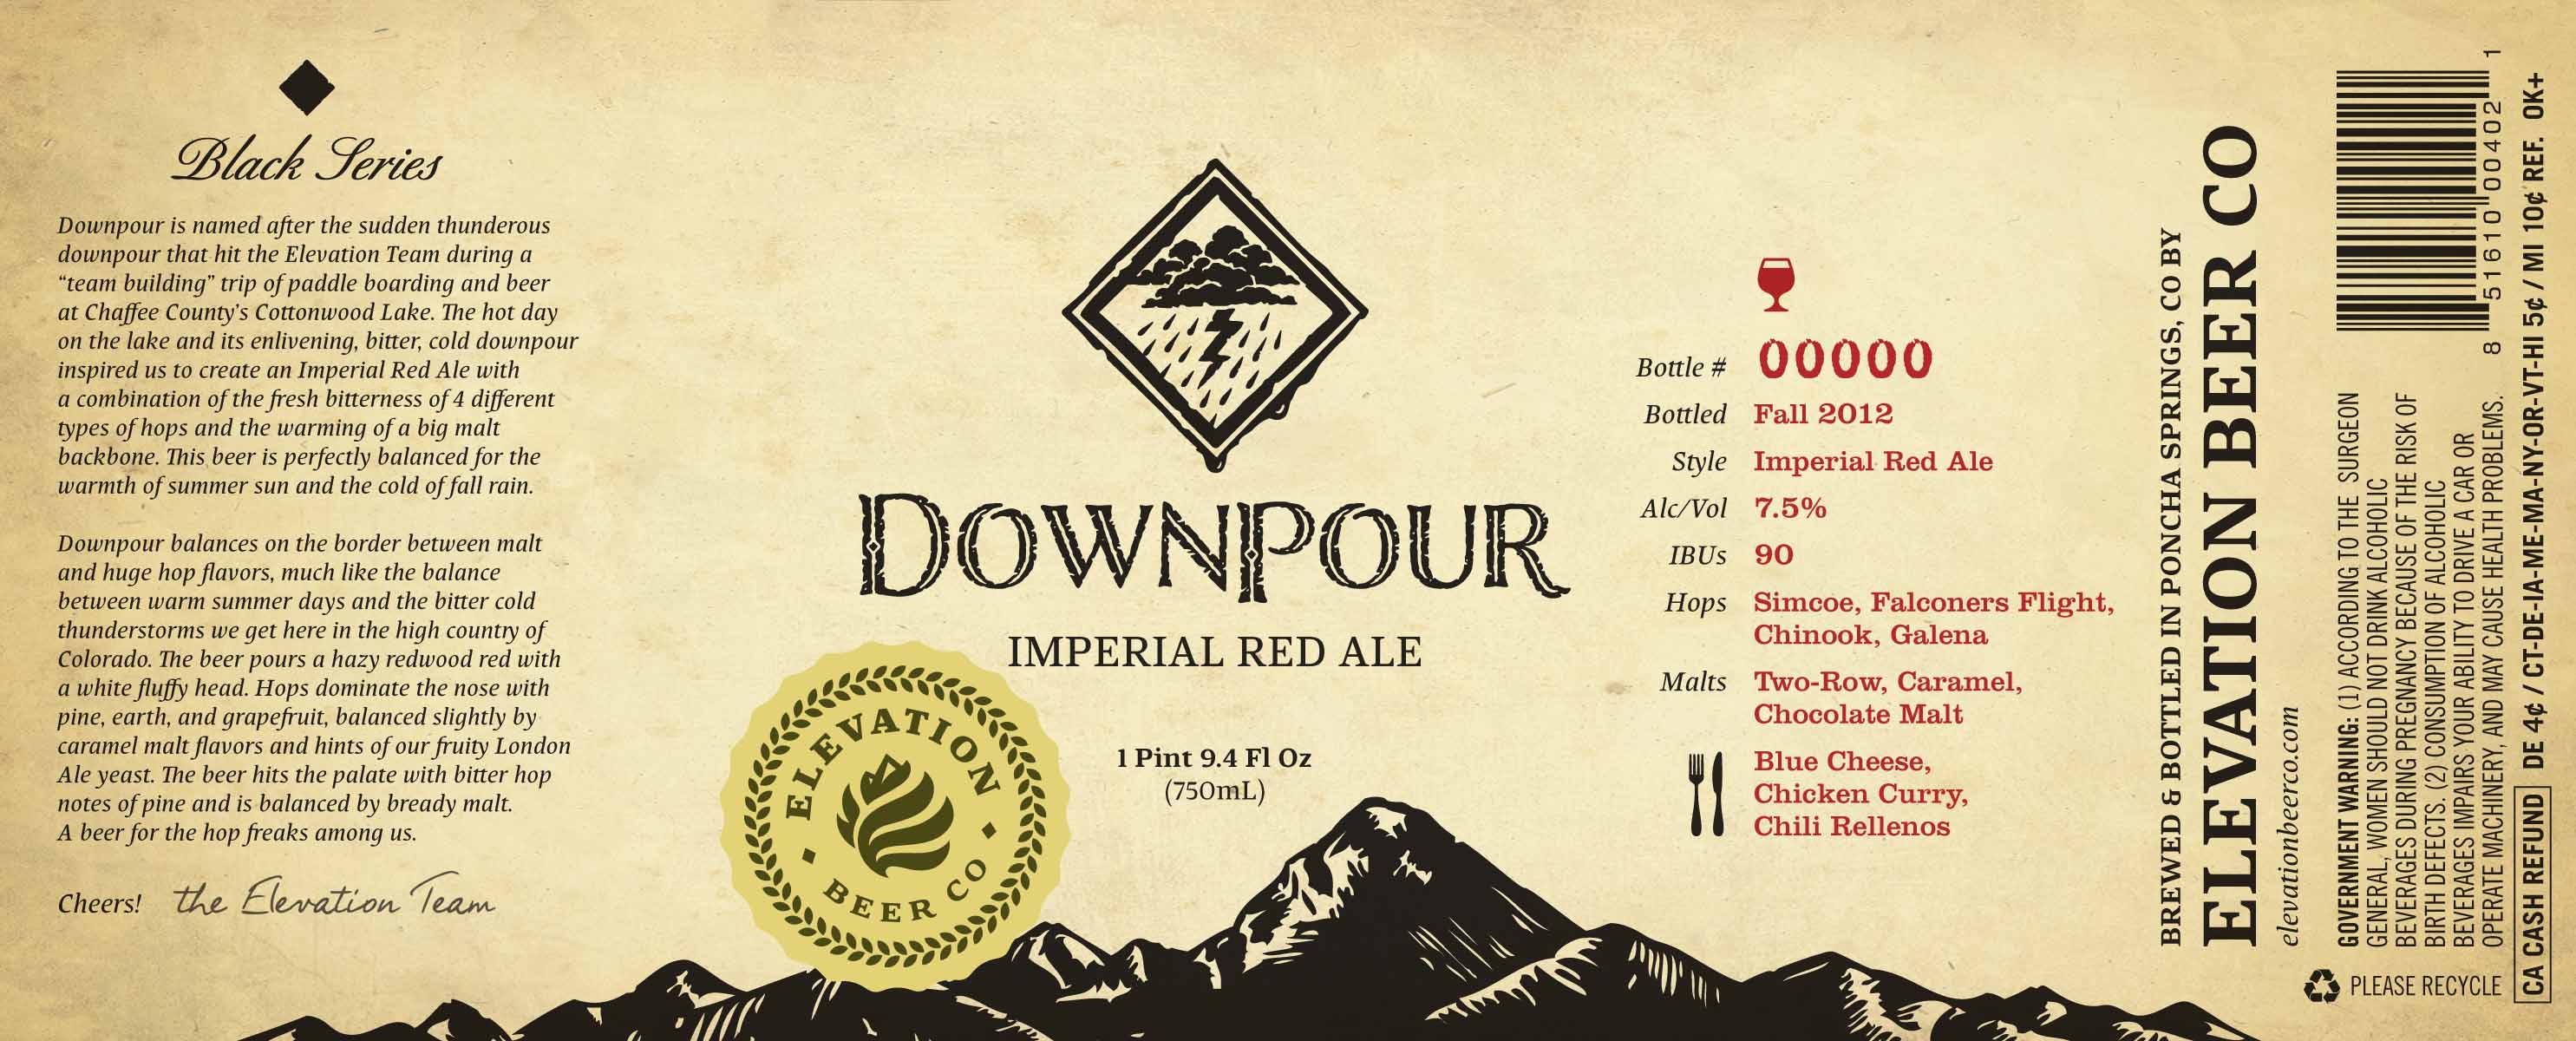 Elevation Downpour Imperial Red Ale